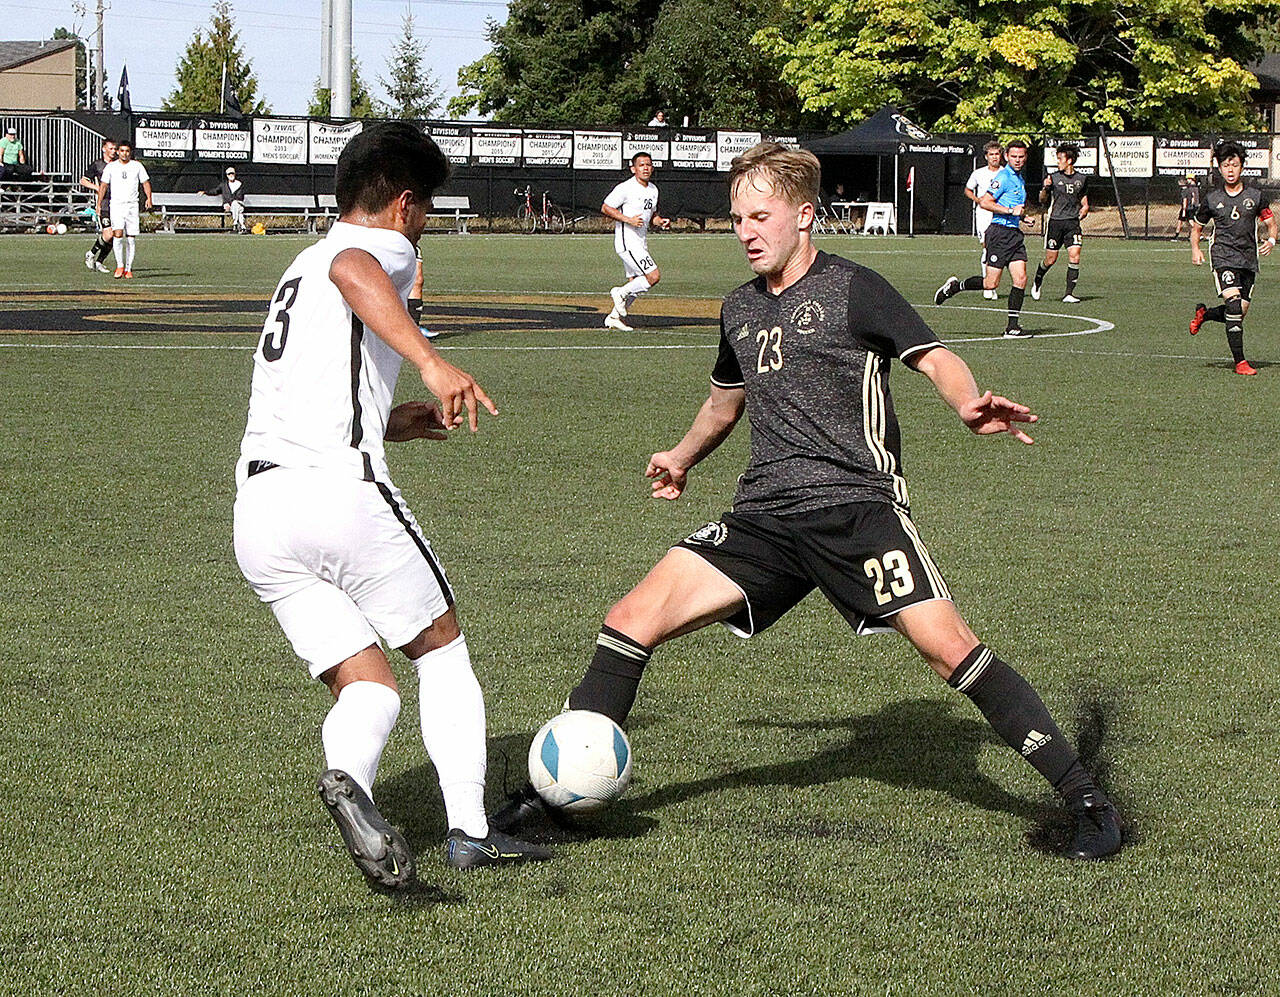 Peninsula College’s Tim Deser (23) fights for the ball with Wenatchee Valley’s Sebastian Aviles on Sunday afternoon at Wally Sigmar Field. The Pirates won 3-0 behind three goals in the second half. (Dave Logan/for Peninsula Daily News)